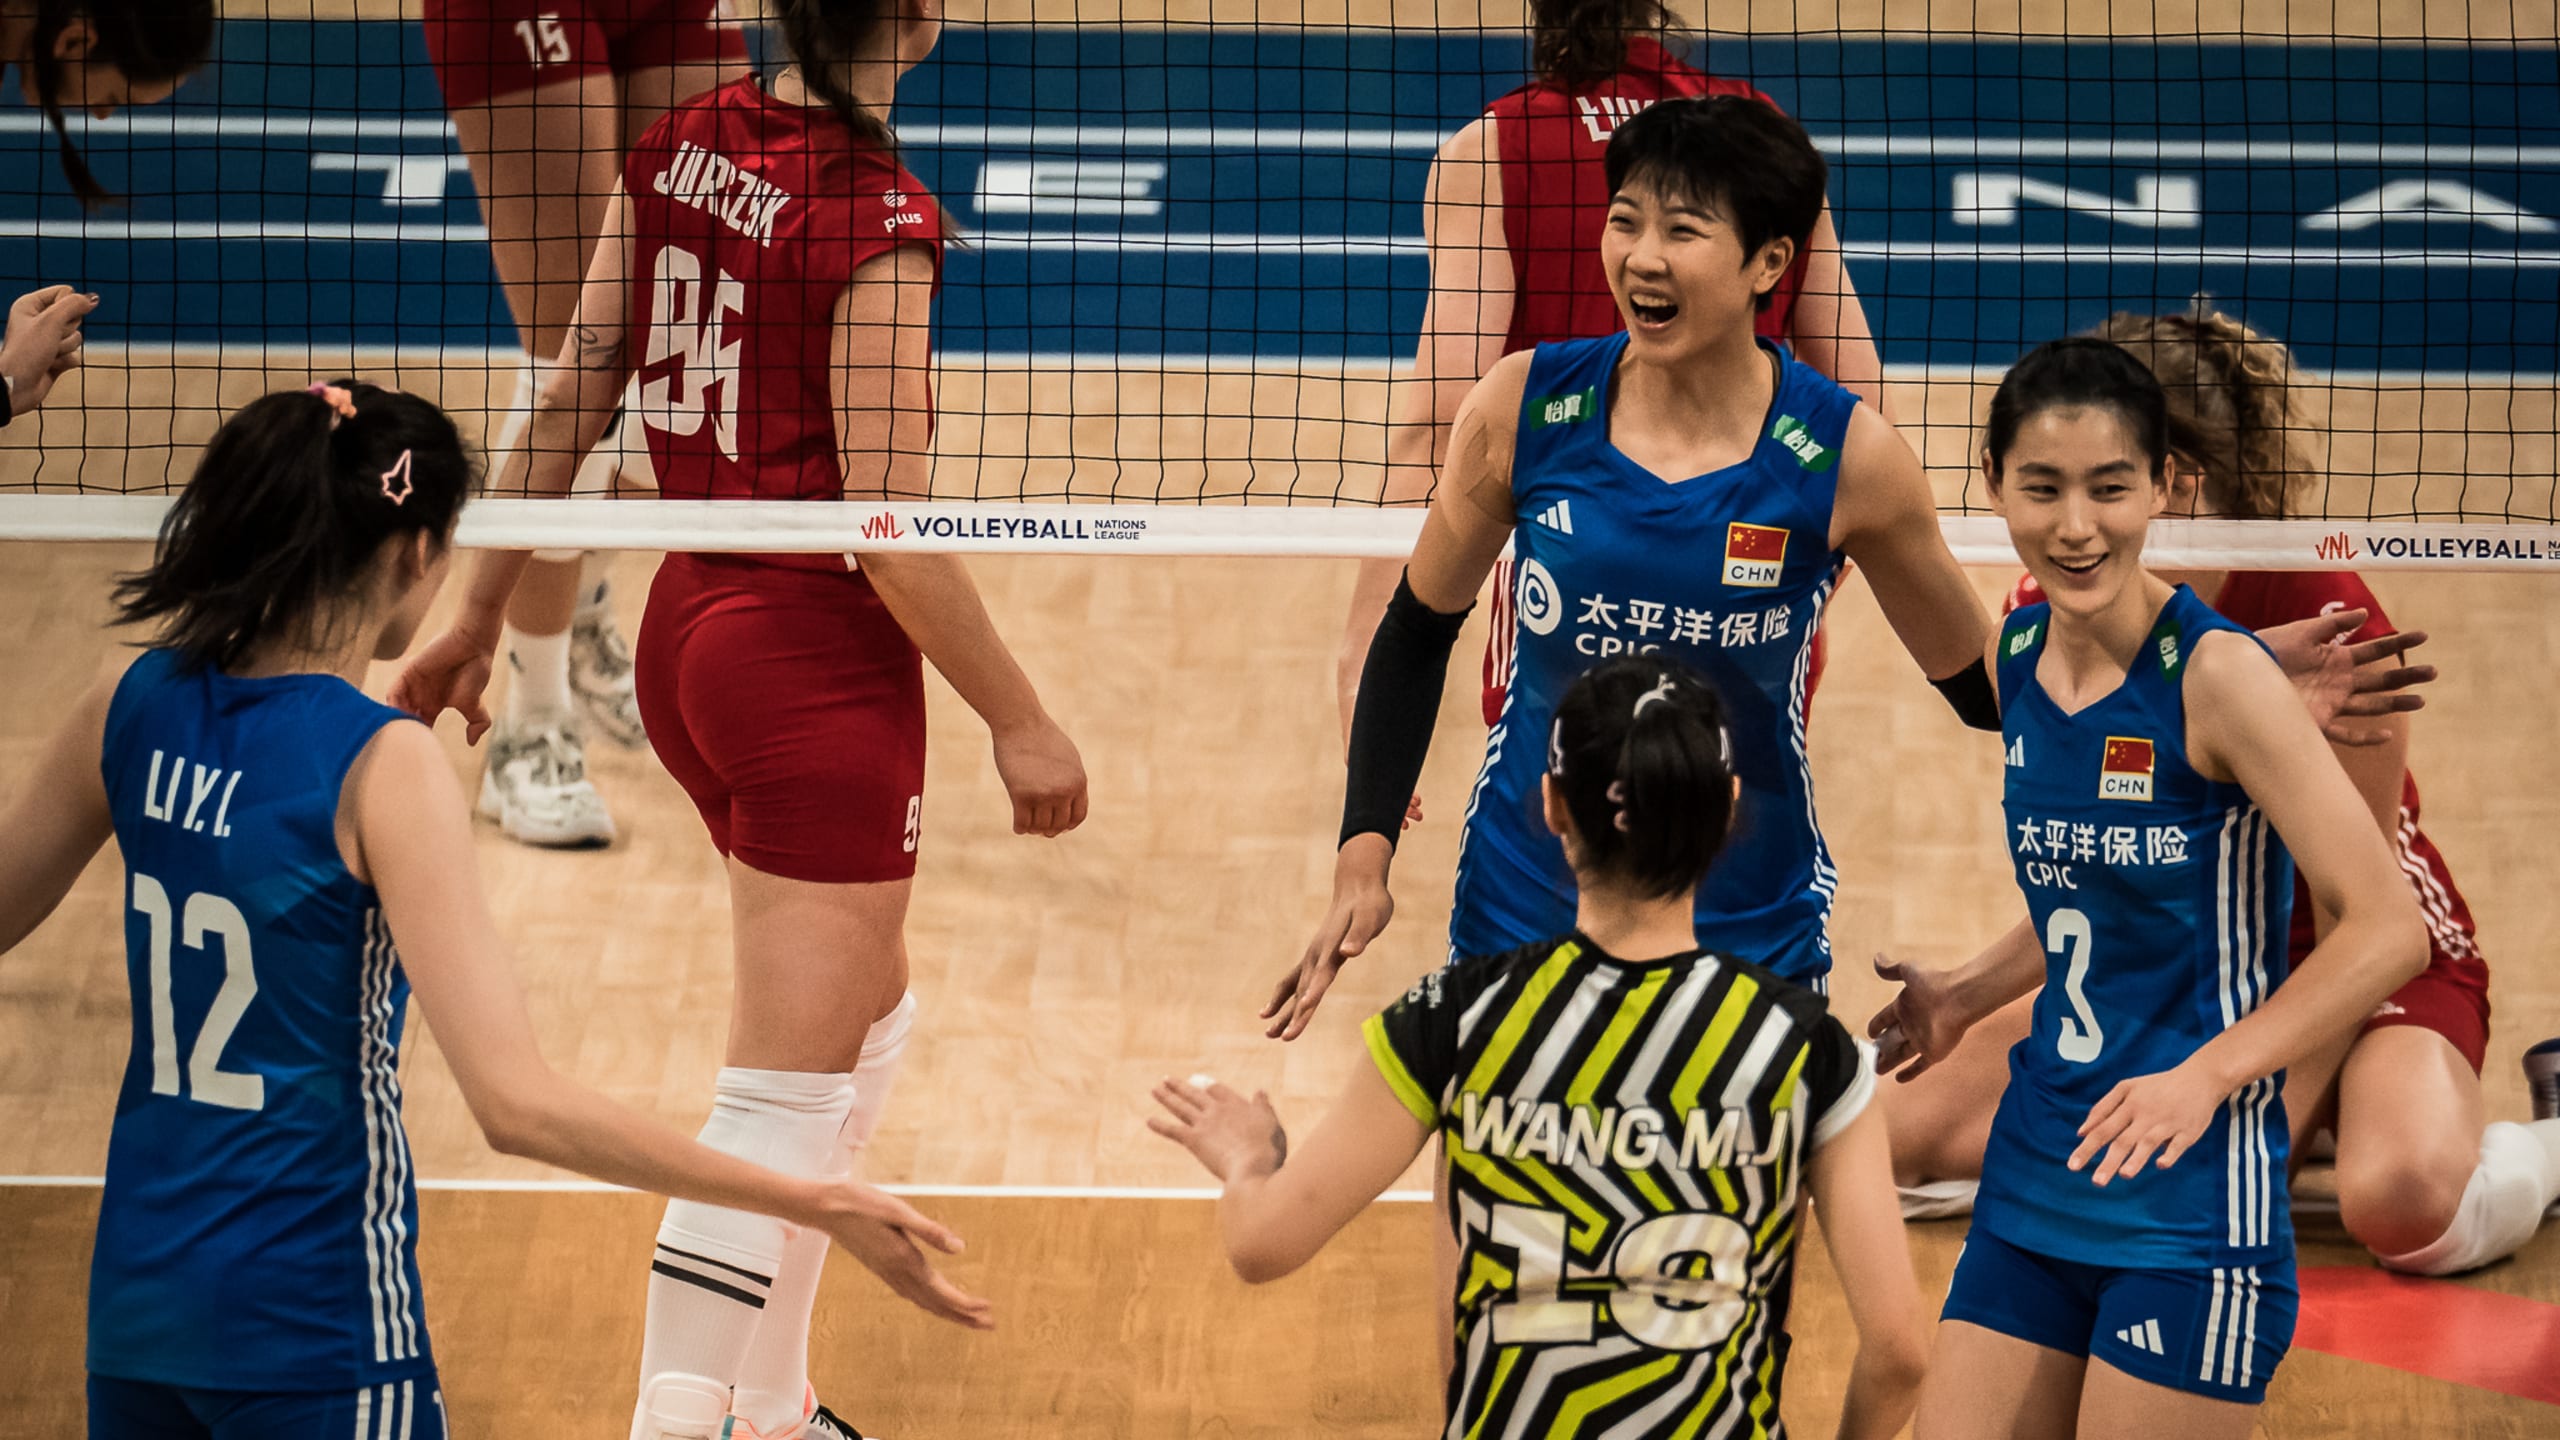 BRILLIANT CHINA SWEEP POLAND AND ADVANCE TO FIRST VNL FINAL